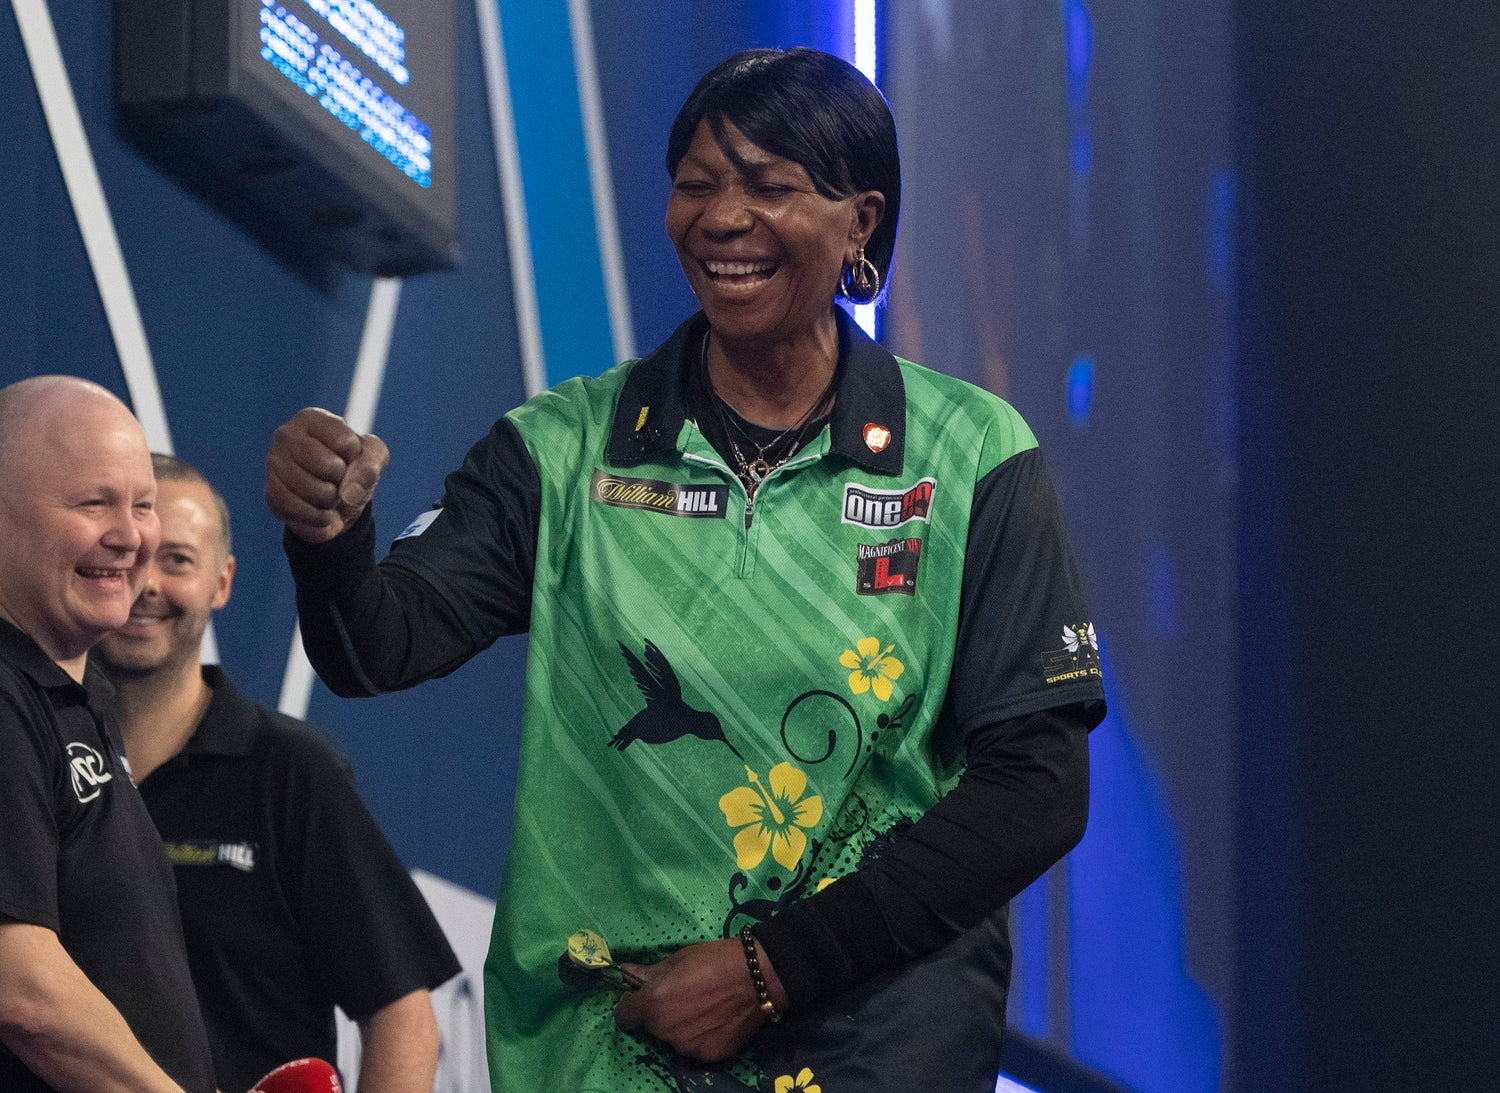 Countdown continues to 2021 PDC Women's Series